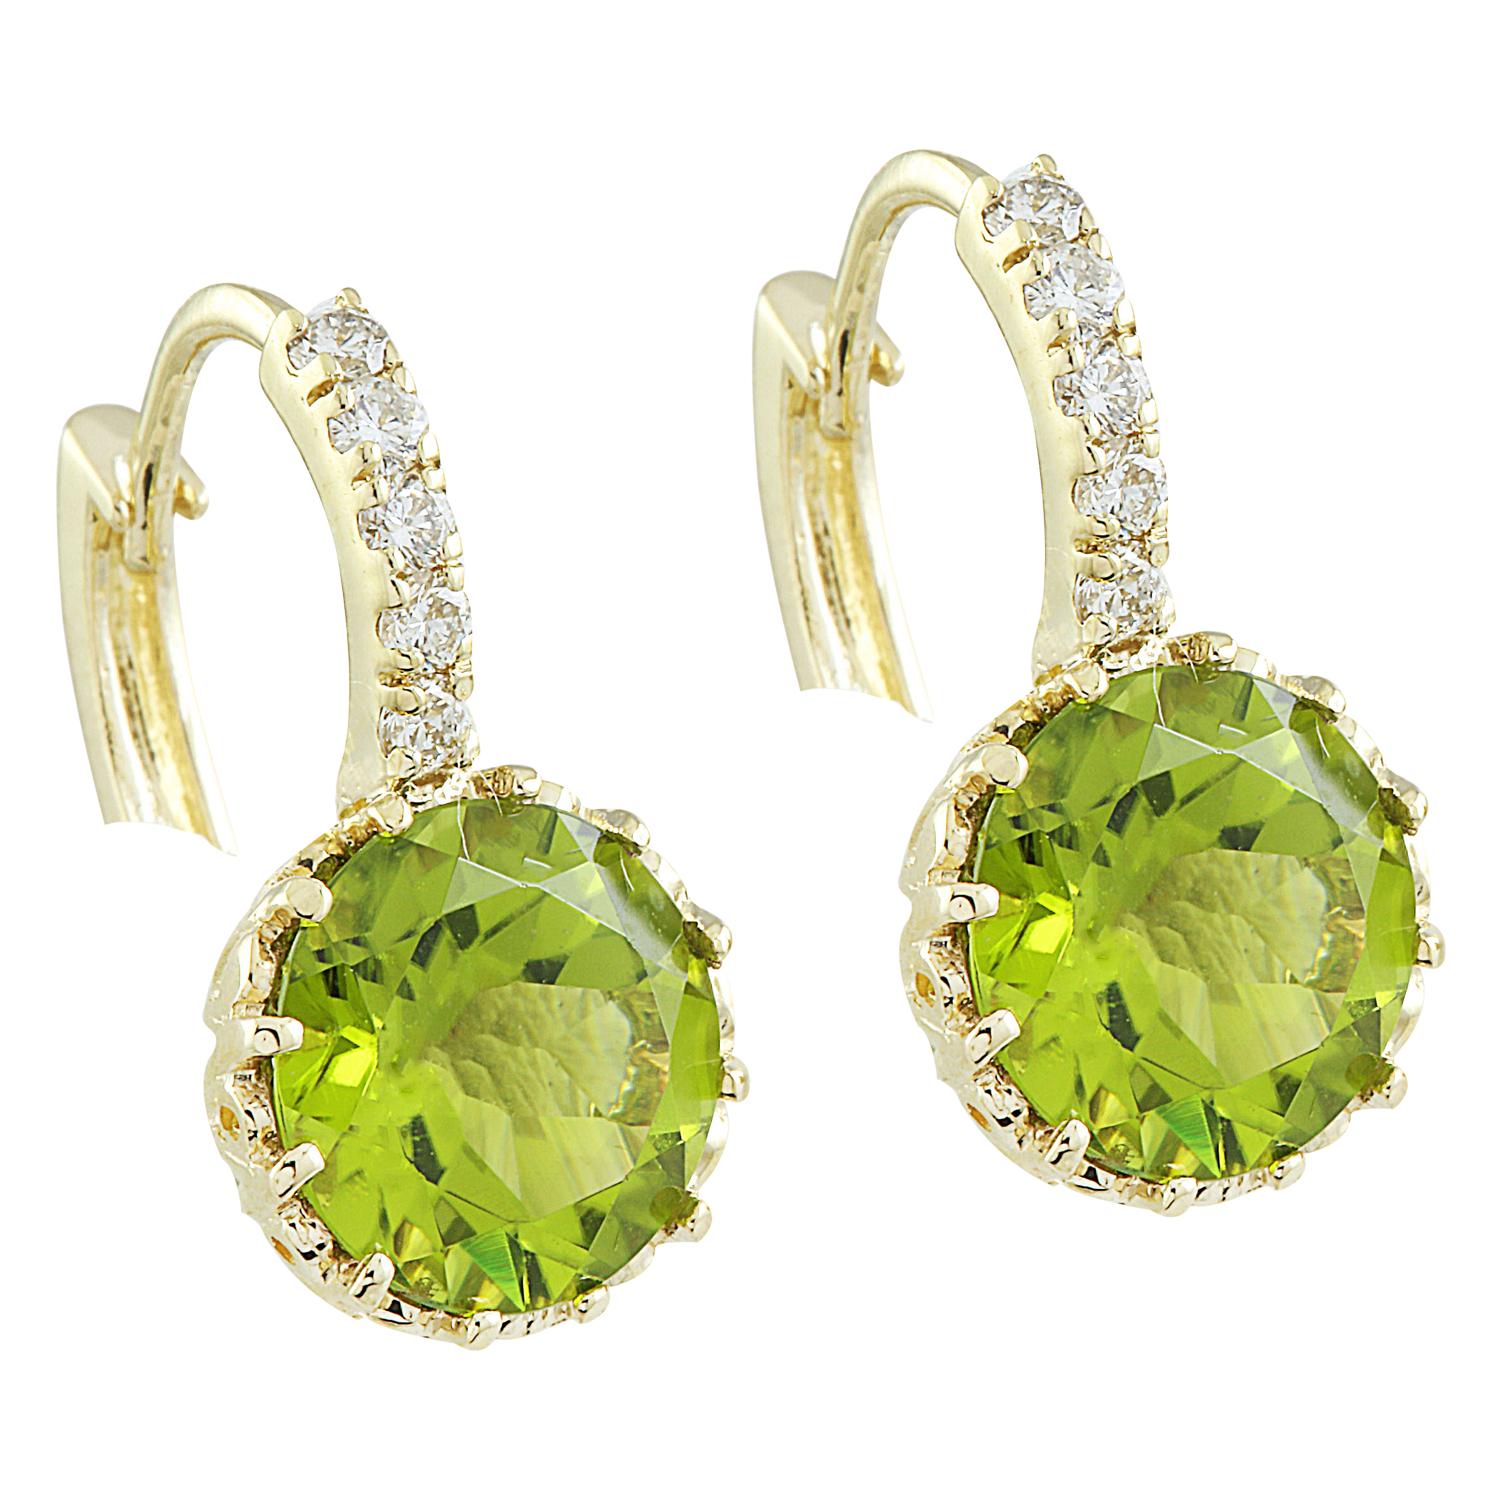 5.15 Carat Natural Peridot 14 Karat Solid Yellow Gold Diamond Earrings
Stamped: 14K 
Total Earrings Weight: 3.8 Grams 
Peridot Weight: 4.90 Carat (8.50x8.50 Millimeters) 
Diamond Weight: 0.25 Carat (F-G Color, VS2-SI1 Clarity )
Length: 0.72